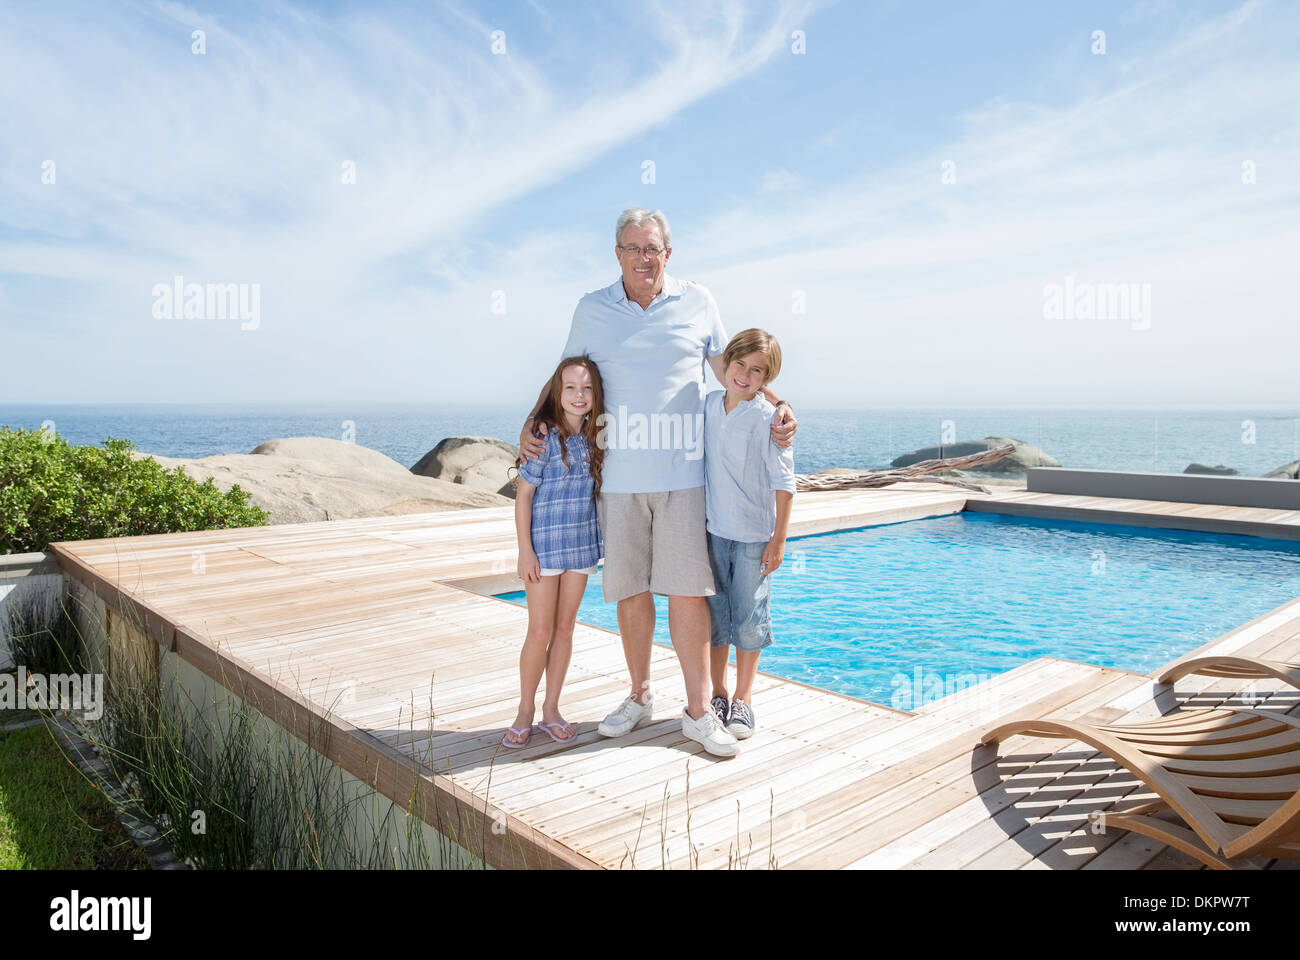 Older man and grandchildren smiling by pool Stock Photo